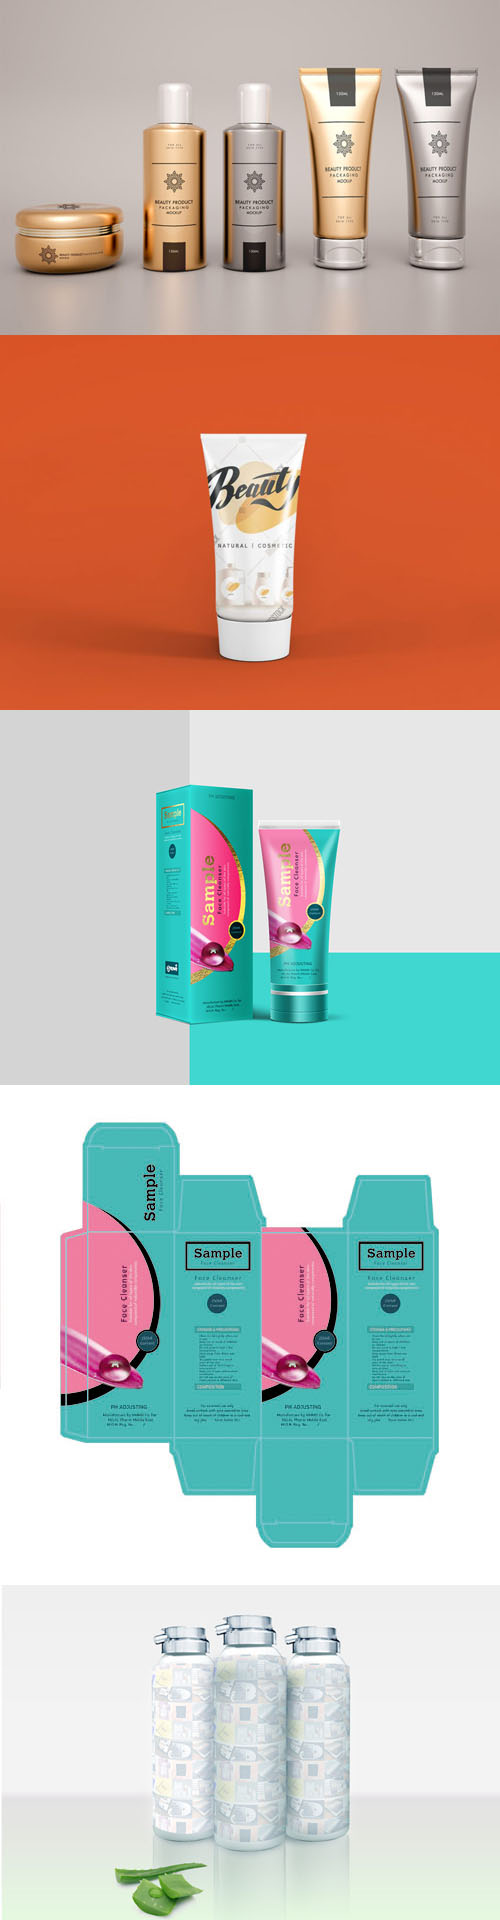 Cosmetic Product Design Packaging PSD Mockups